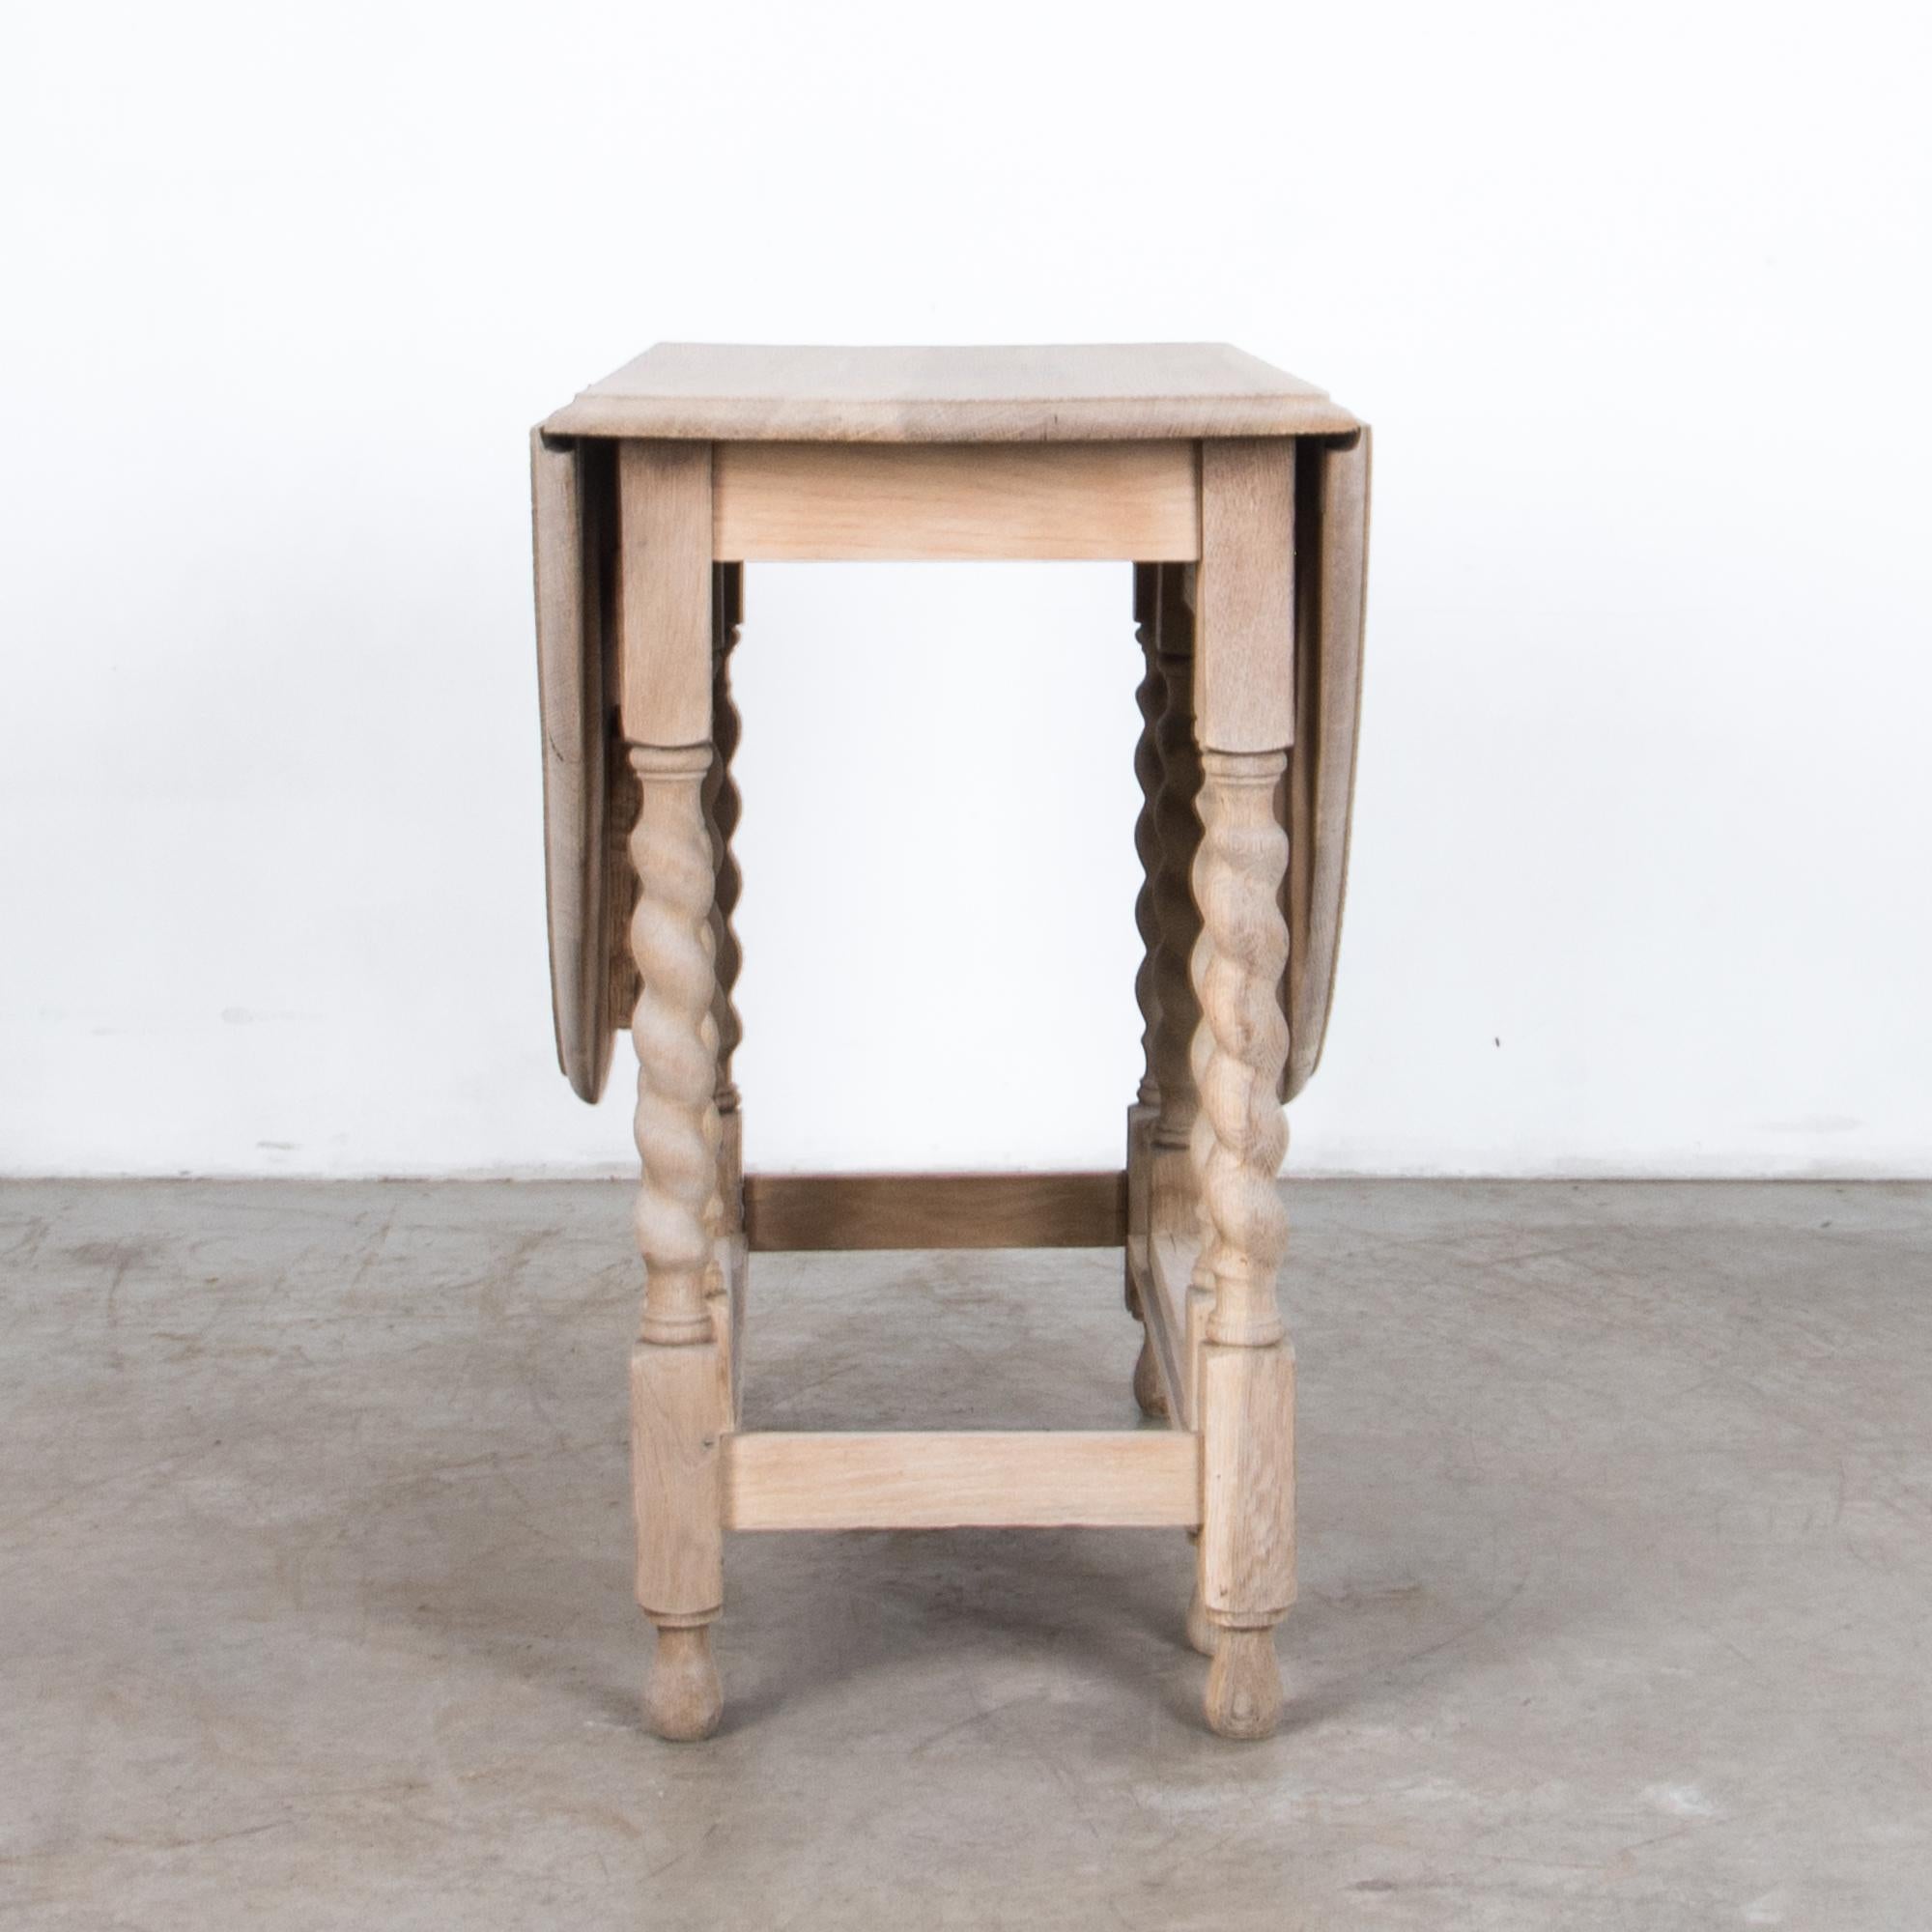 A folding gate leg table from the United Kingdom, circa 1920. The folding gate leg makes this table versatile and practical while retaining stability, and style. Carved details and turned table legs give a classical inflection, “twisted barley